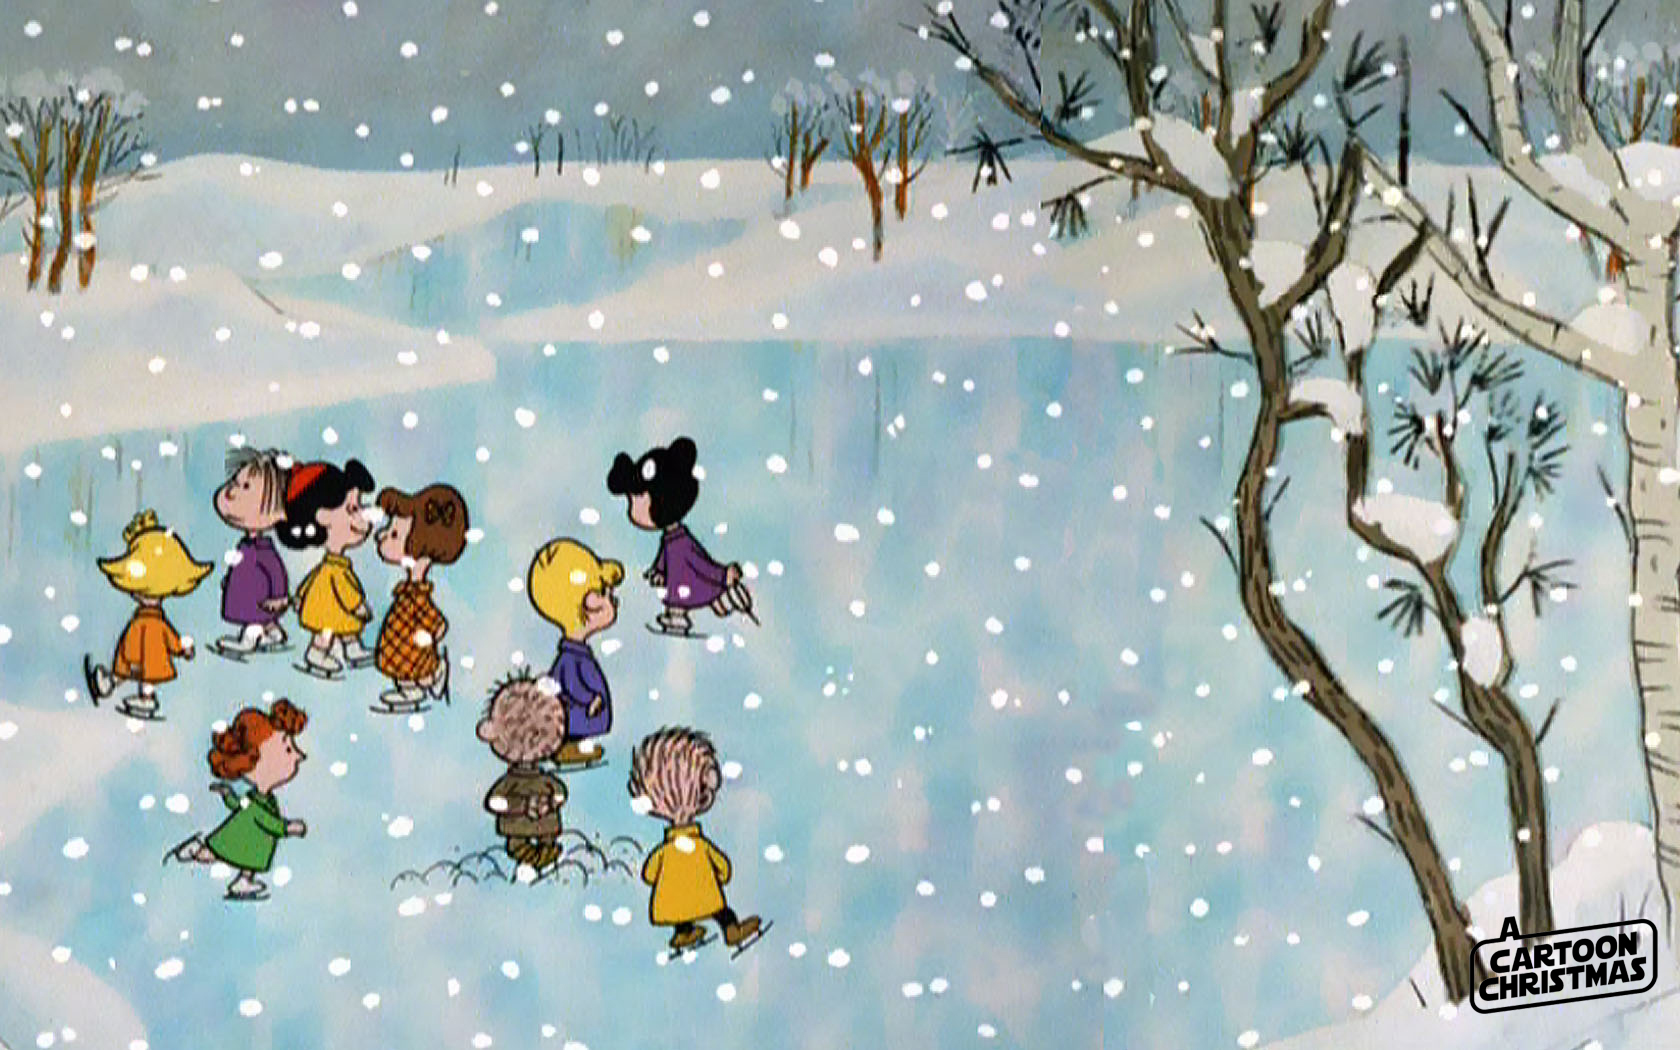 Get your Charlie Brown Chrismas Wallpapers right here    A Cartoon